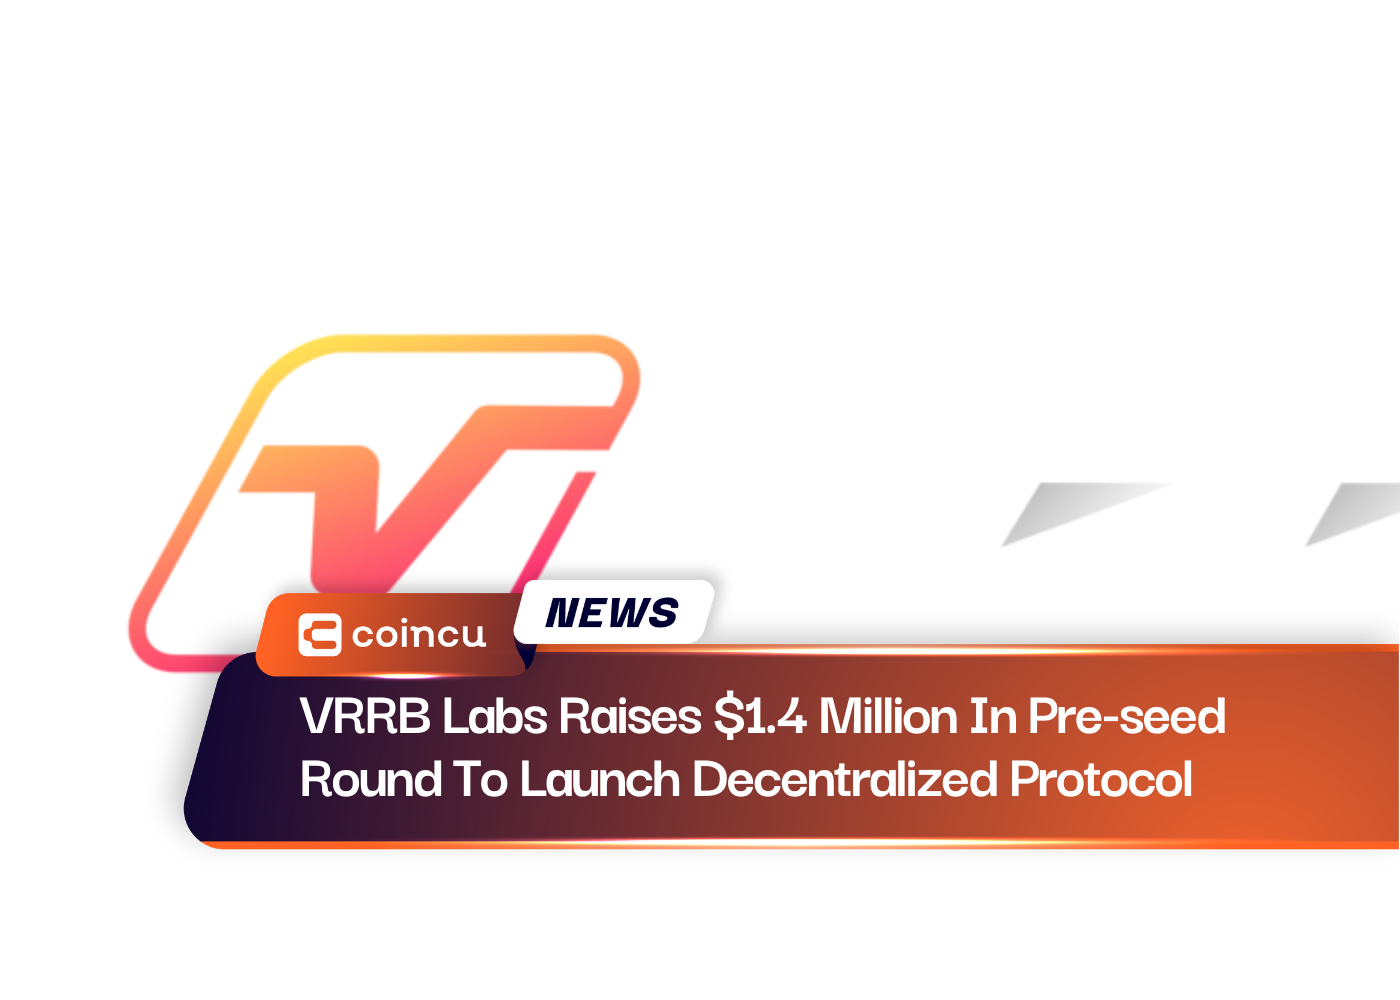 VRRB Labs Raises $1.4 Million In Pre-seed Round To Launch Decentralized Protocol